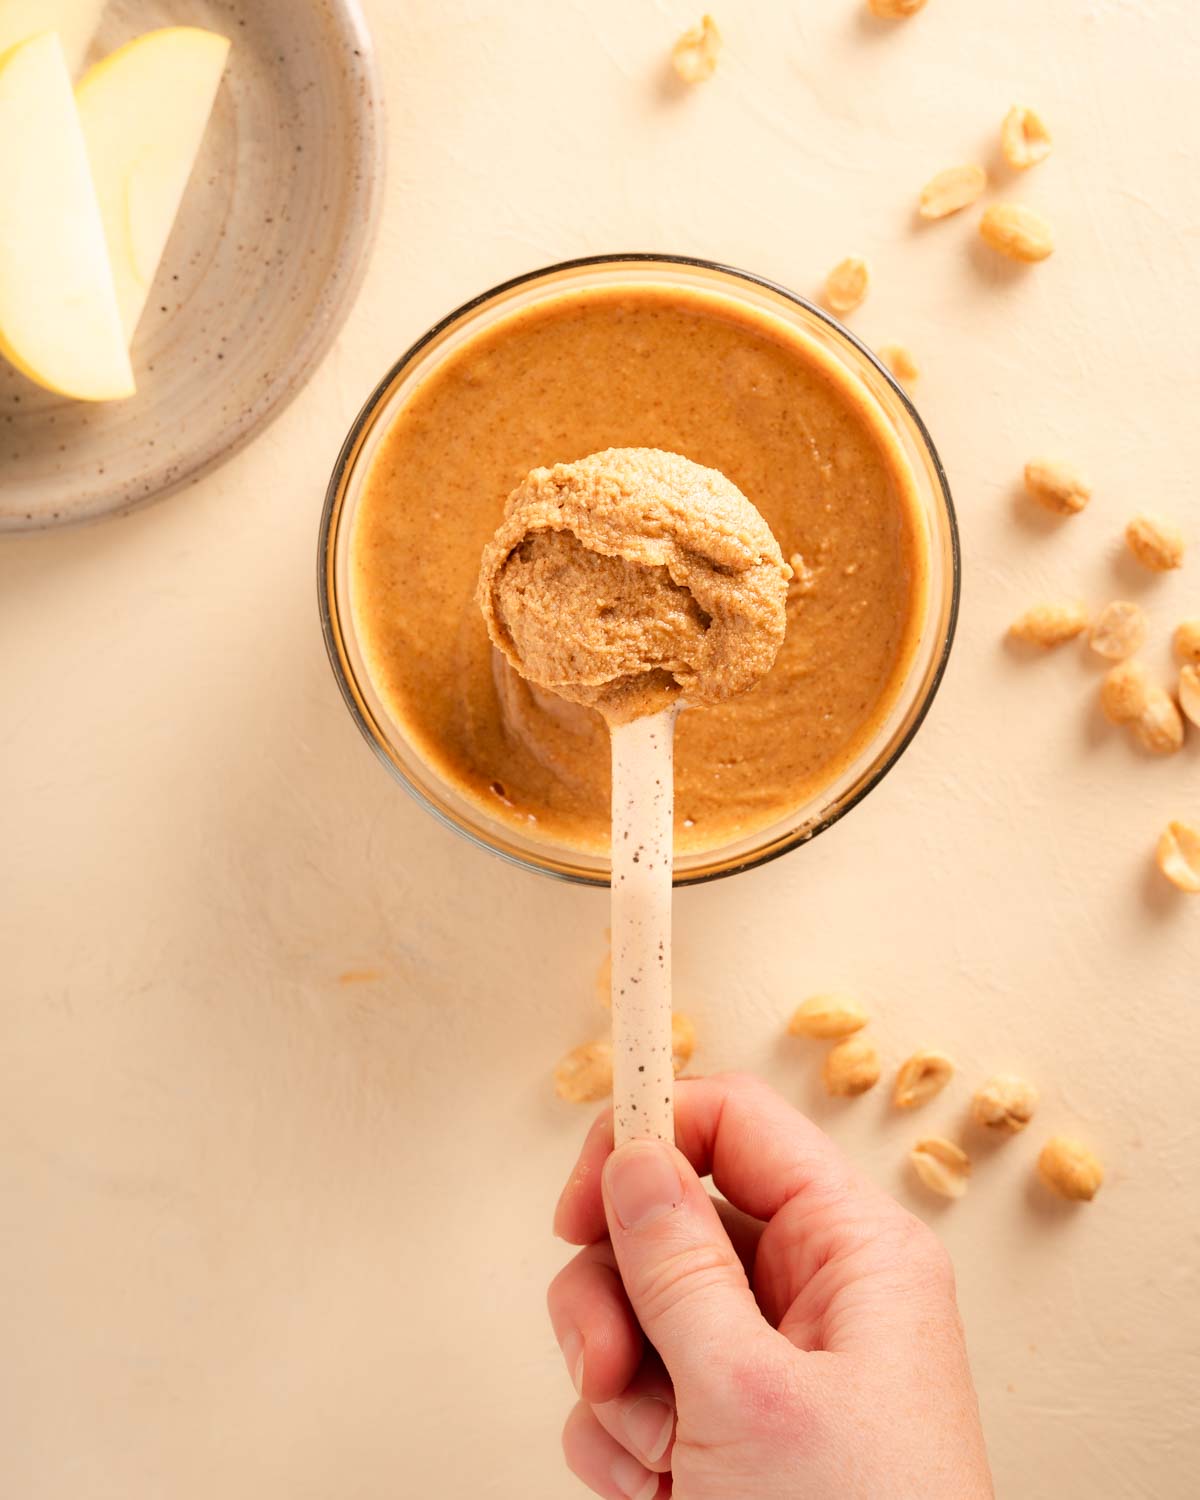 A hand holding a ceramic spoon with thick and creamy Vanilla Cinnamon Peanut butter on the spoon.